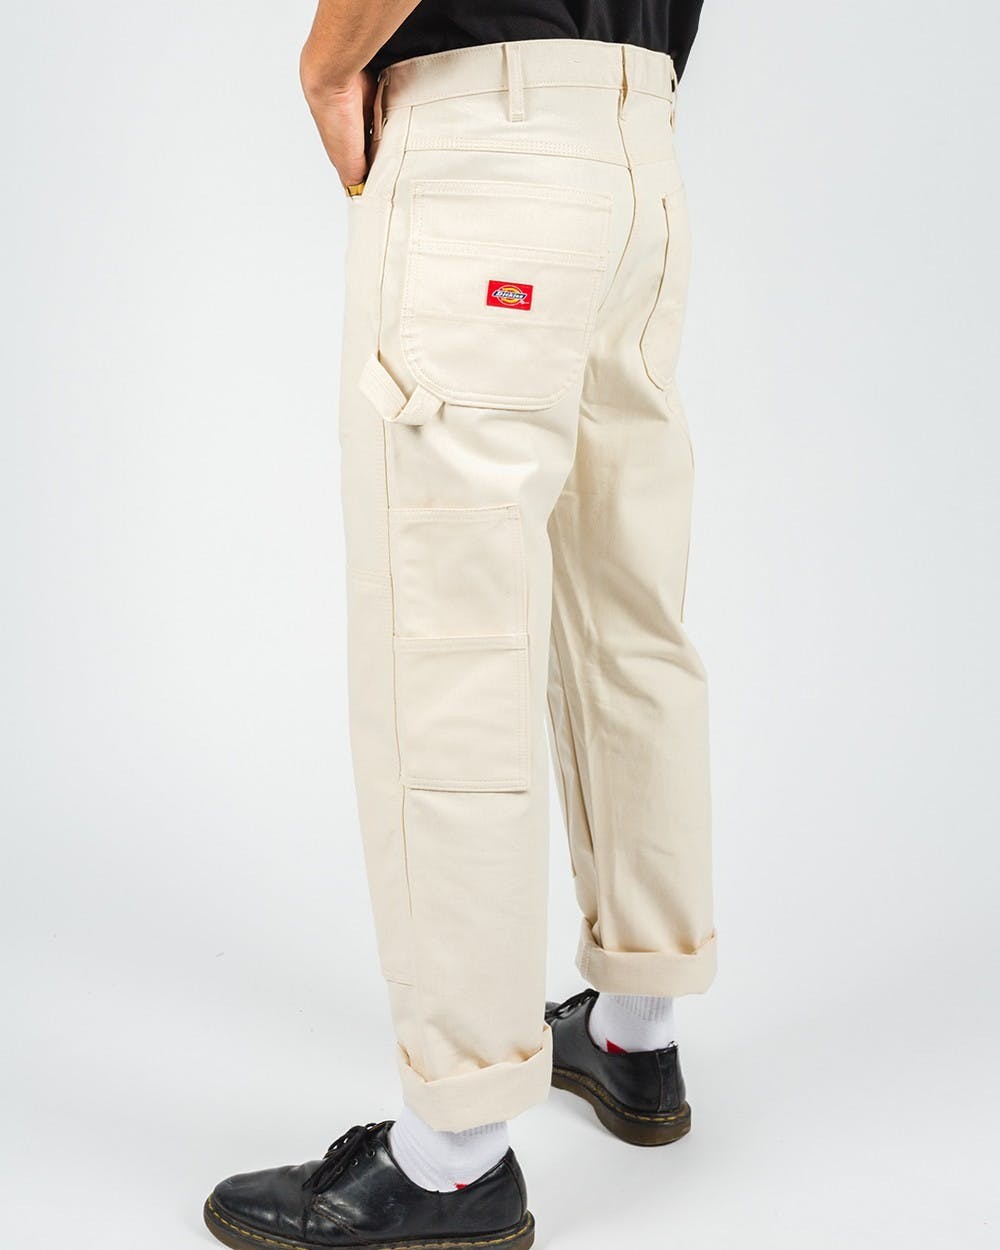 Women's Relaxed Fit Double Knee Pants - Dickies US